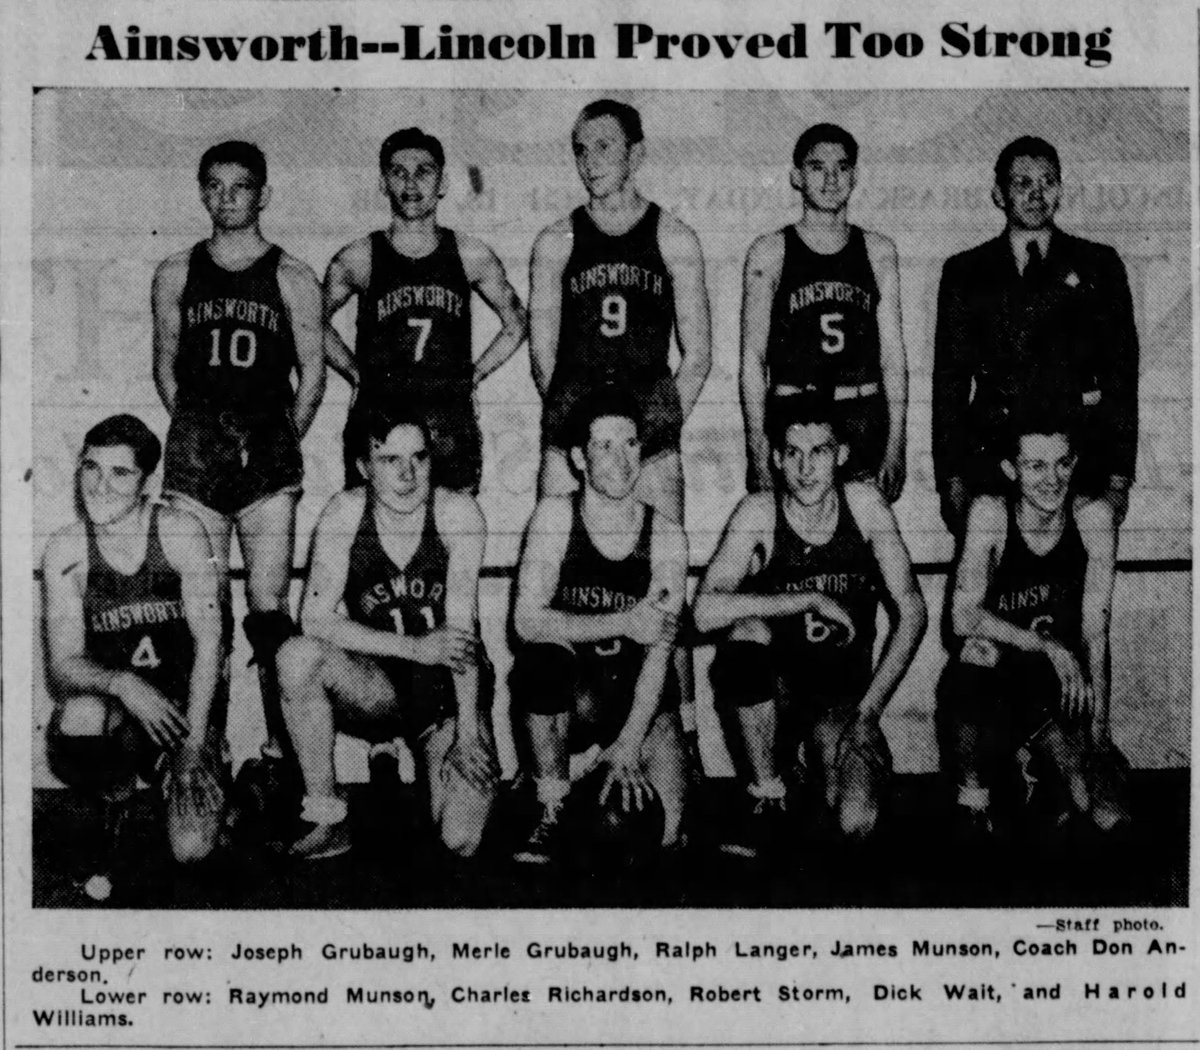 The 1938 Bulldogs were Class A state runners-up. Only powerful Lincoln High could stop this Ainsworth bunch. Ralph Langer, #9, was a two-time all-stater.